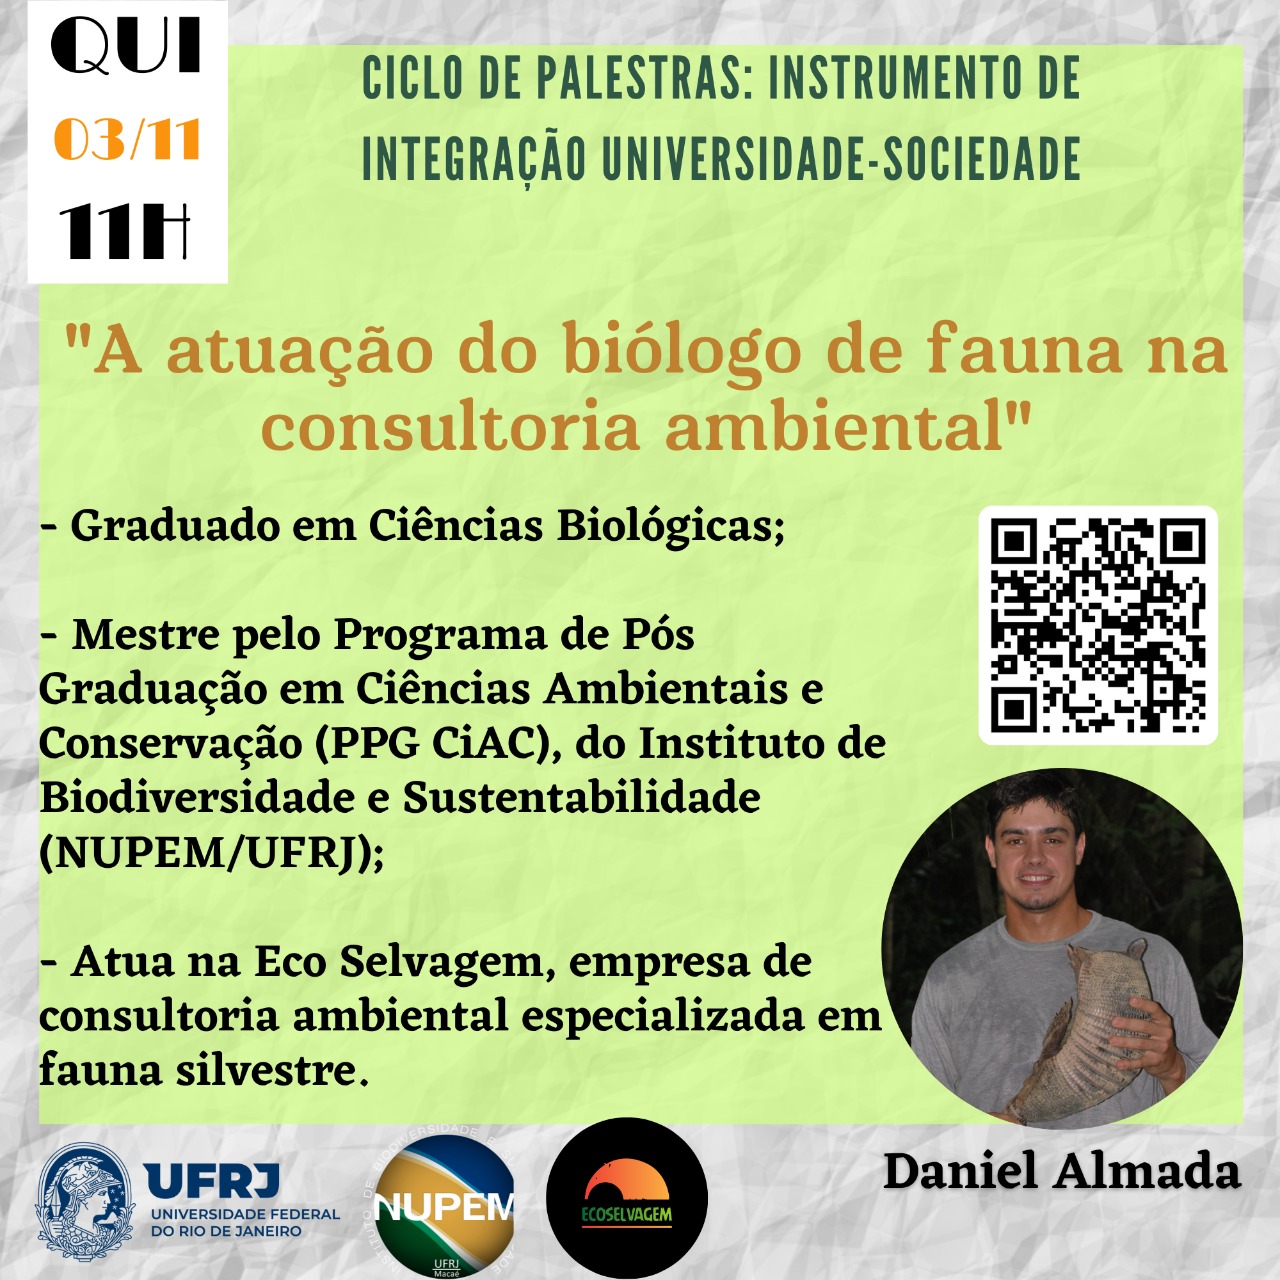 You are currently viewing Ciclo de Palestras NUPEM/UFRJ (03/11/22)